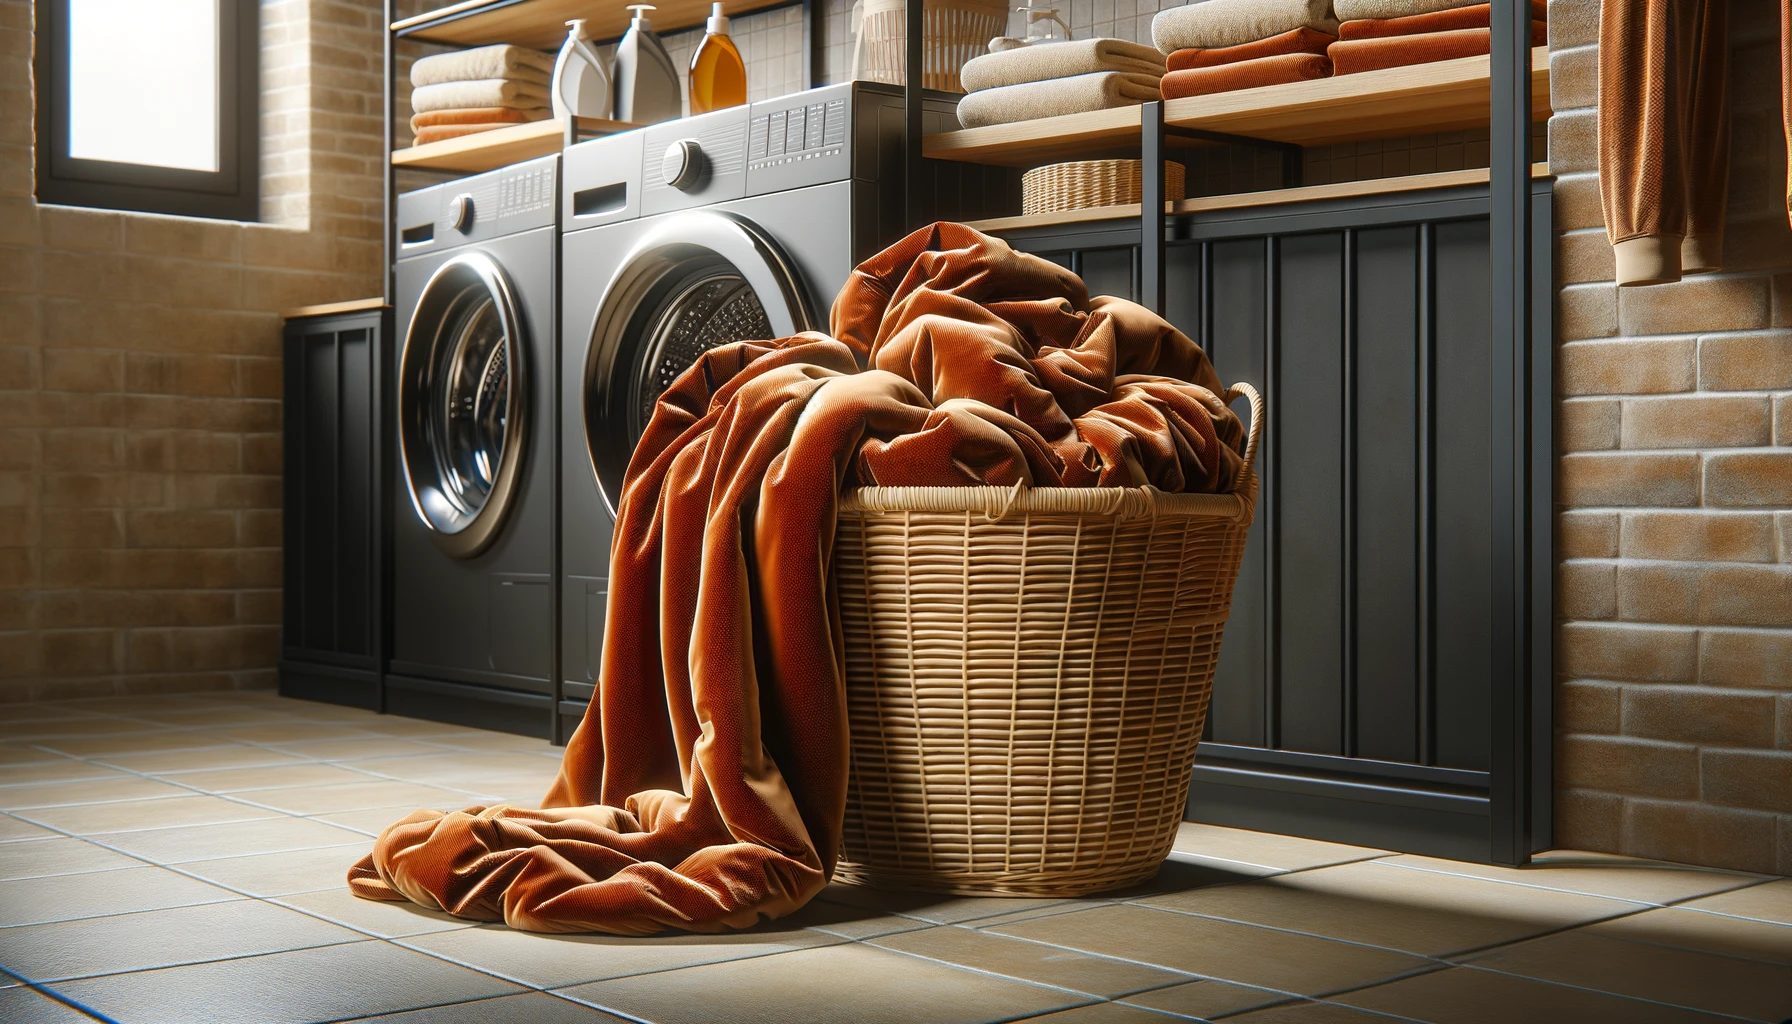 Amber velvet comforter in a wicker basket beside a washing machine in a laundry room.